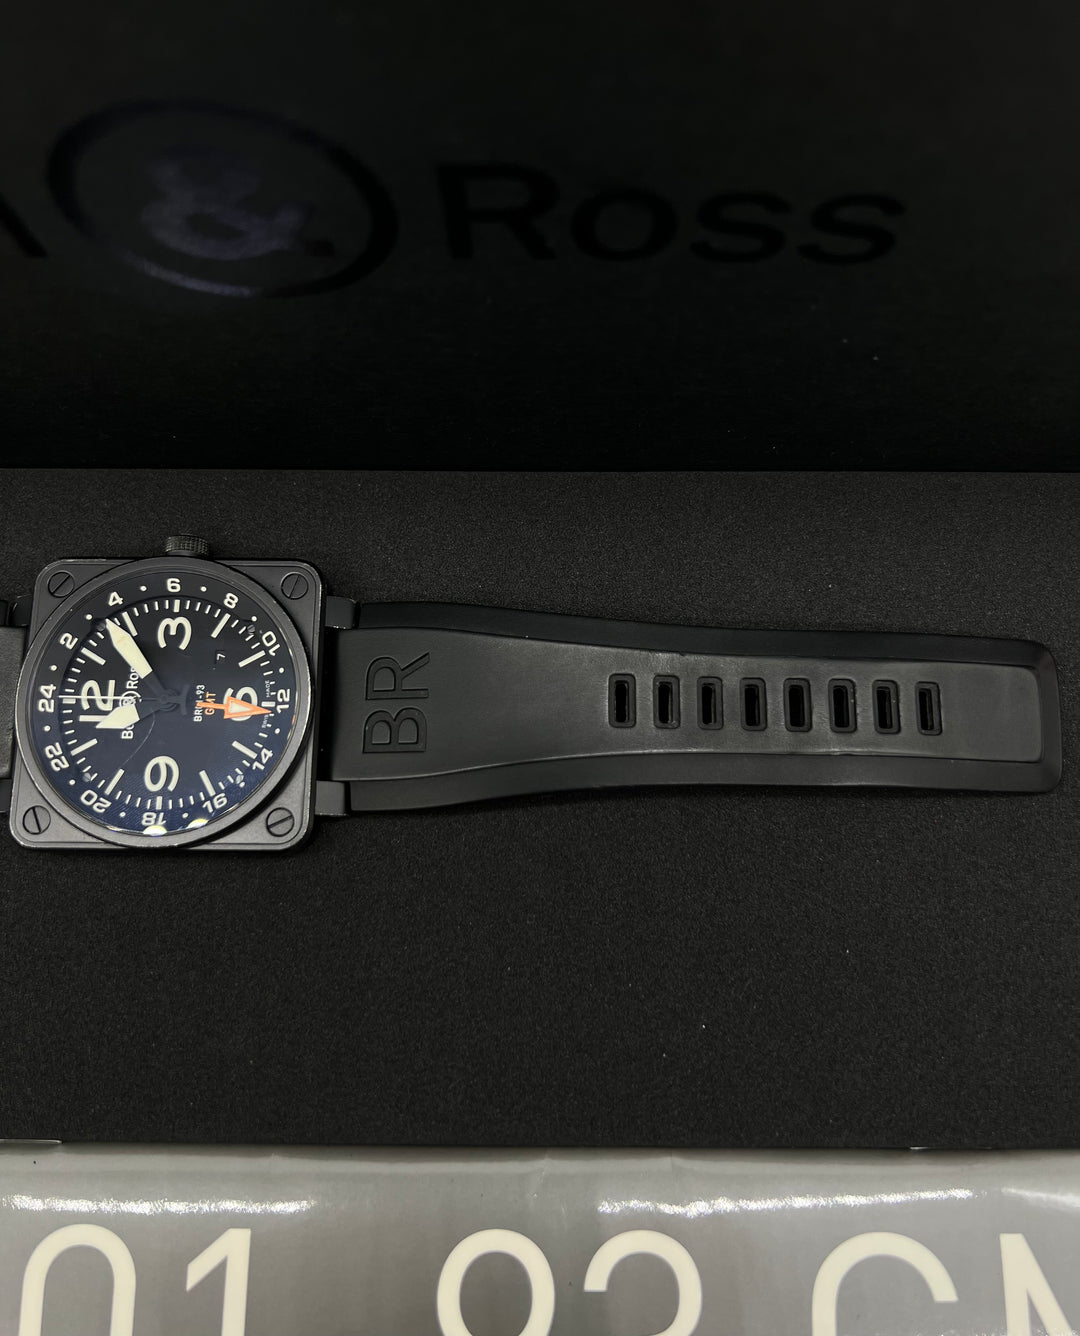 BELL & ROSS BR0193 Black PVD GMT 46mm Automatic Watch